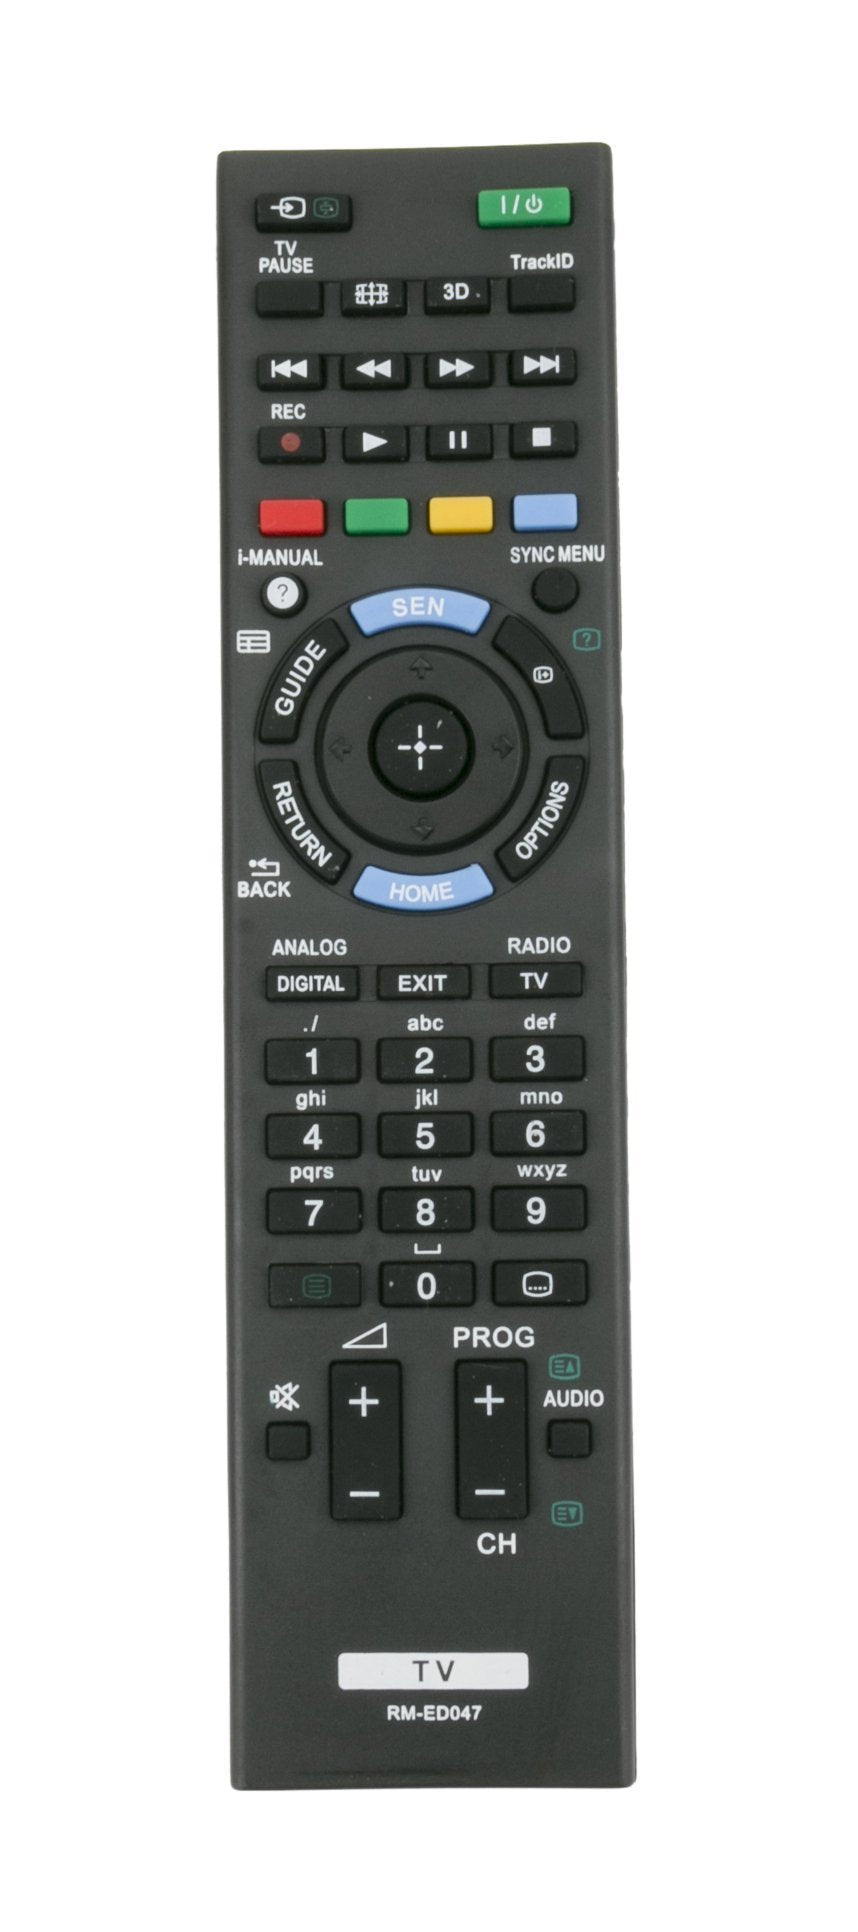 New RM-ED047 Remote Control for Sony LCD TV KDL-32BX321 KDL-32BX420 KDL-32BX421 KDL-40BX420 KDL-22BX321 KDL-32BX320 KDL-46BX420 KDL-46BX421 KDL-55BX520 KDL-32R300B KDL-40BX421 KDL-22BX320 - LeoForward Australia